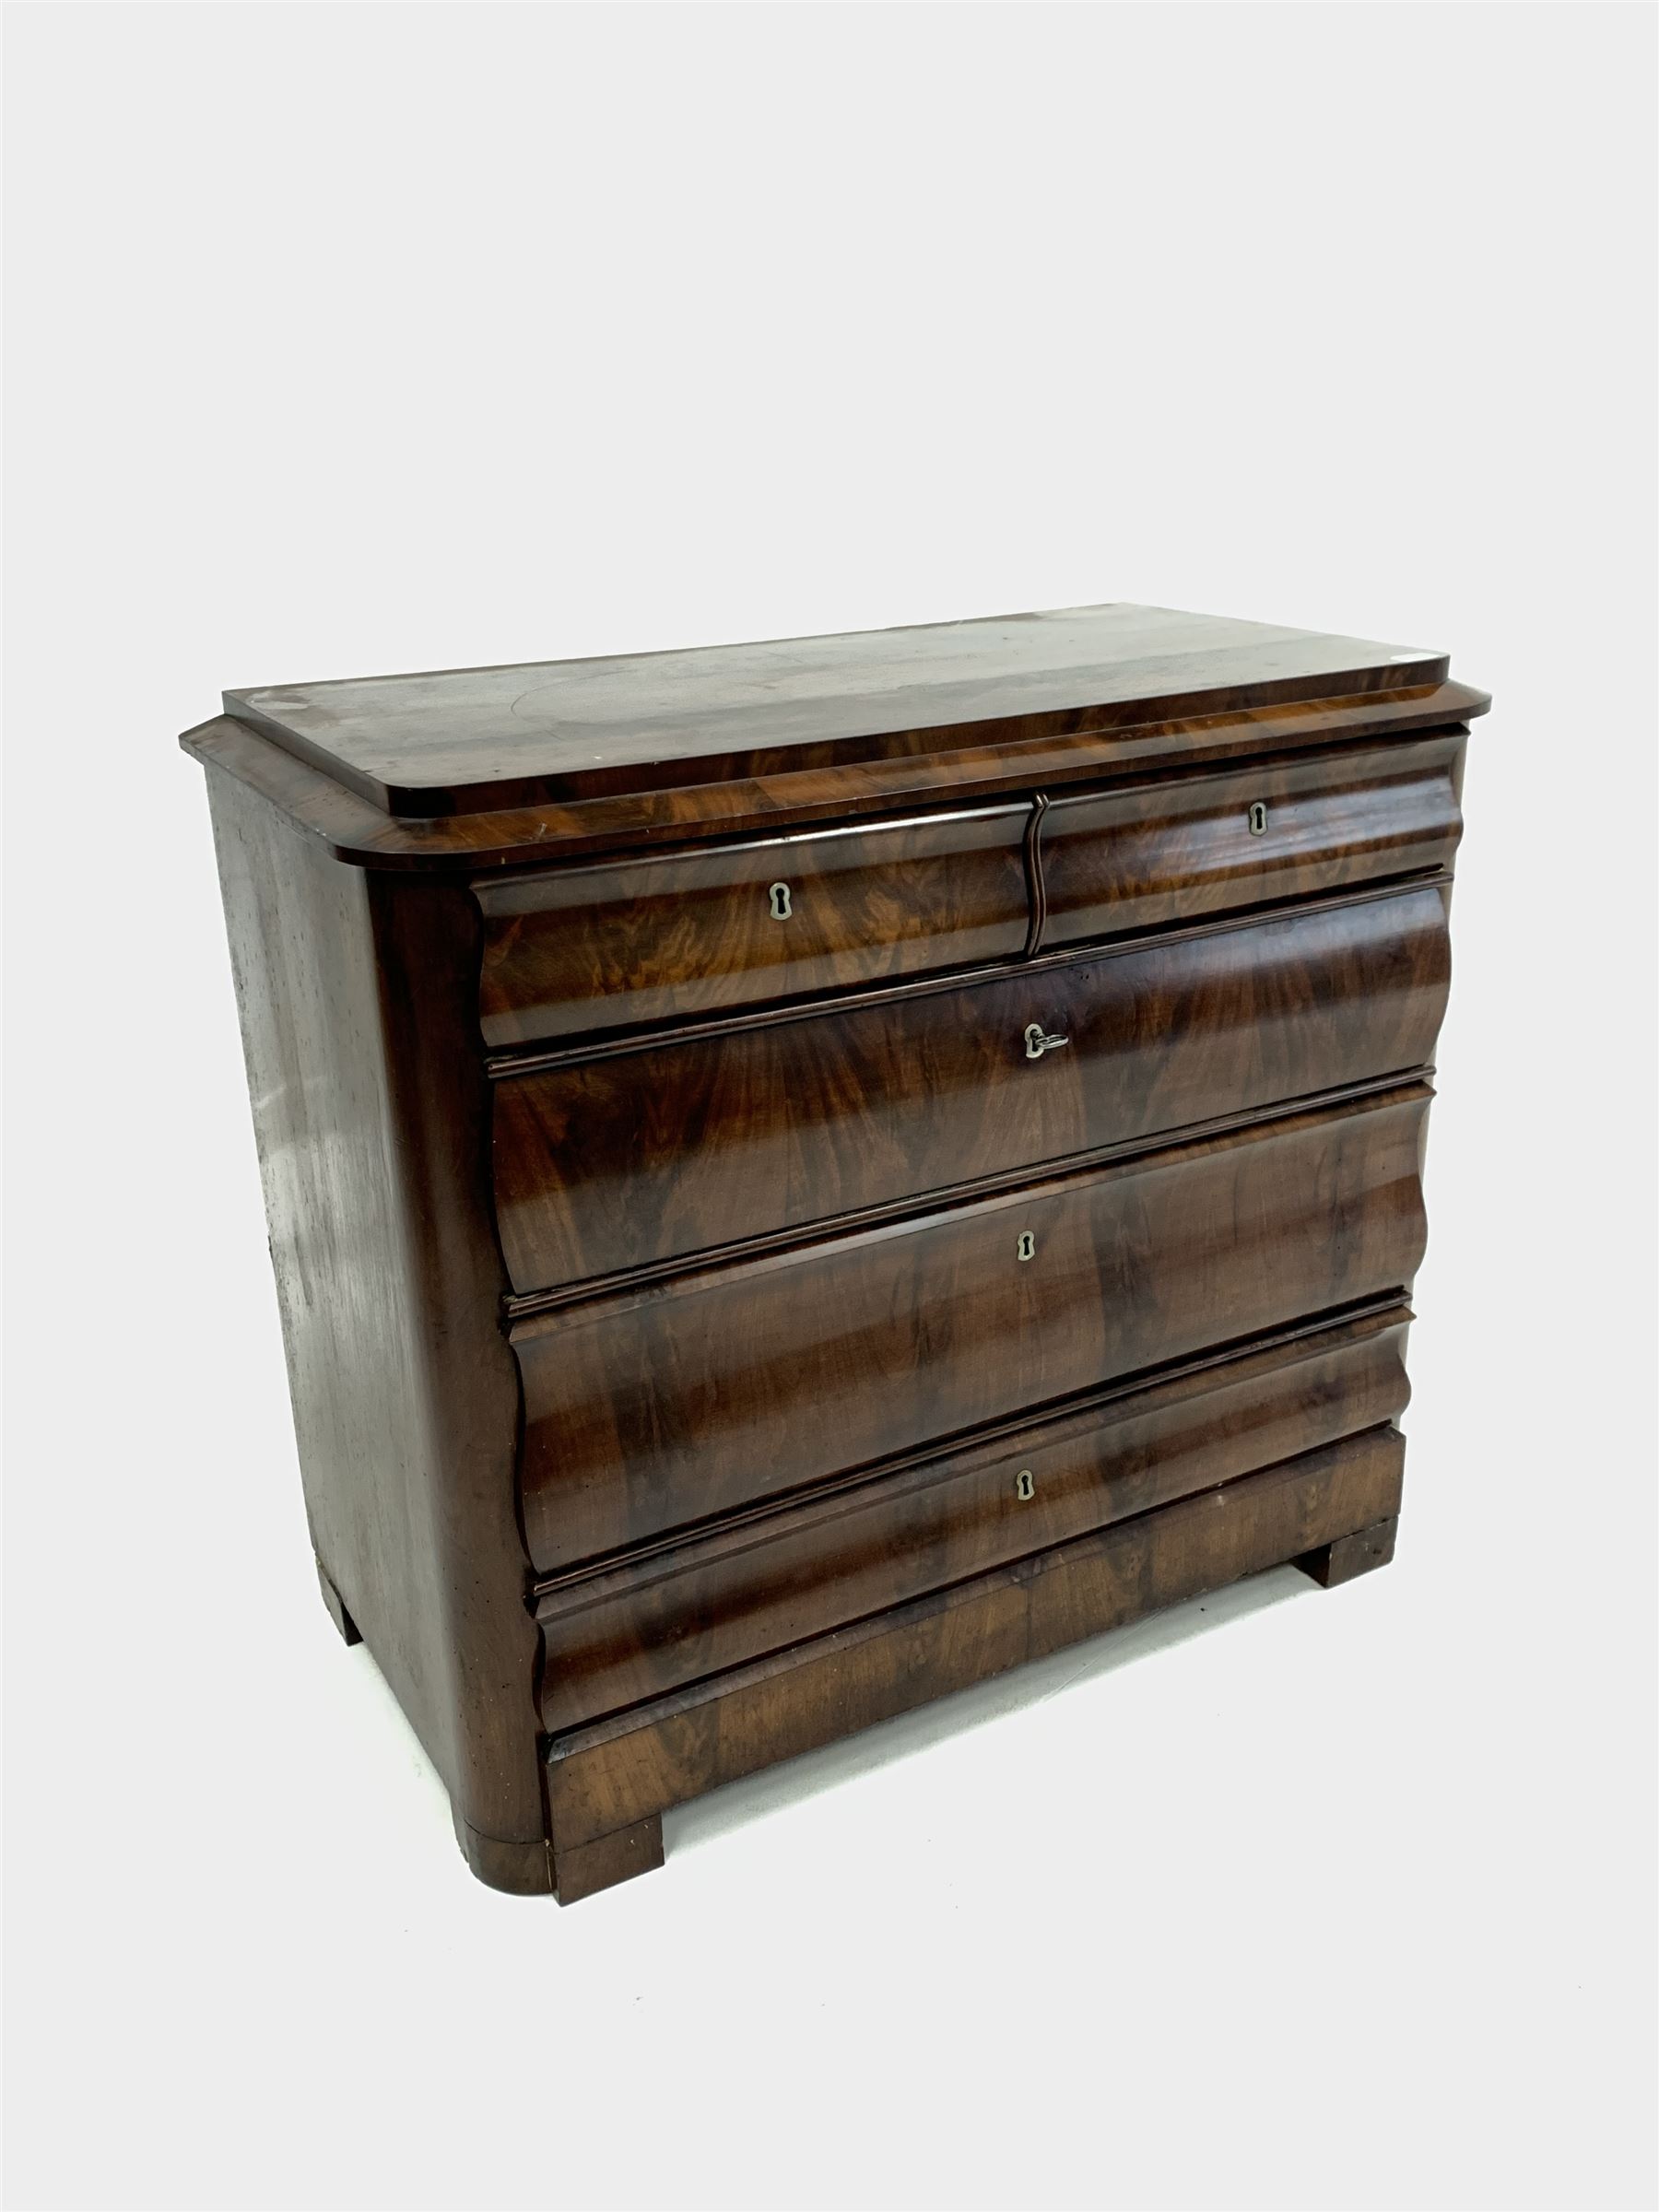 19th century continental mahogany four drawer chest - Image 7 of 7